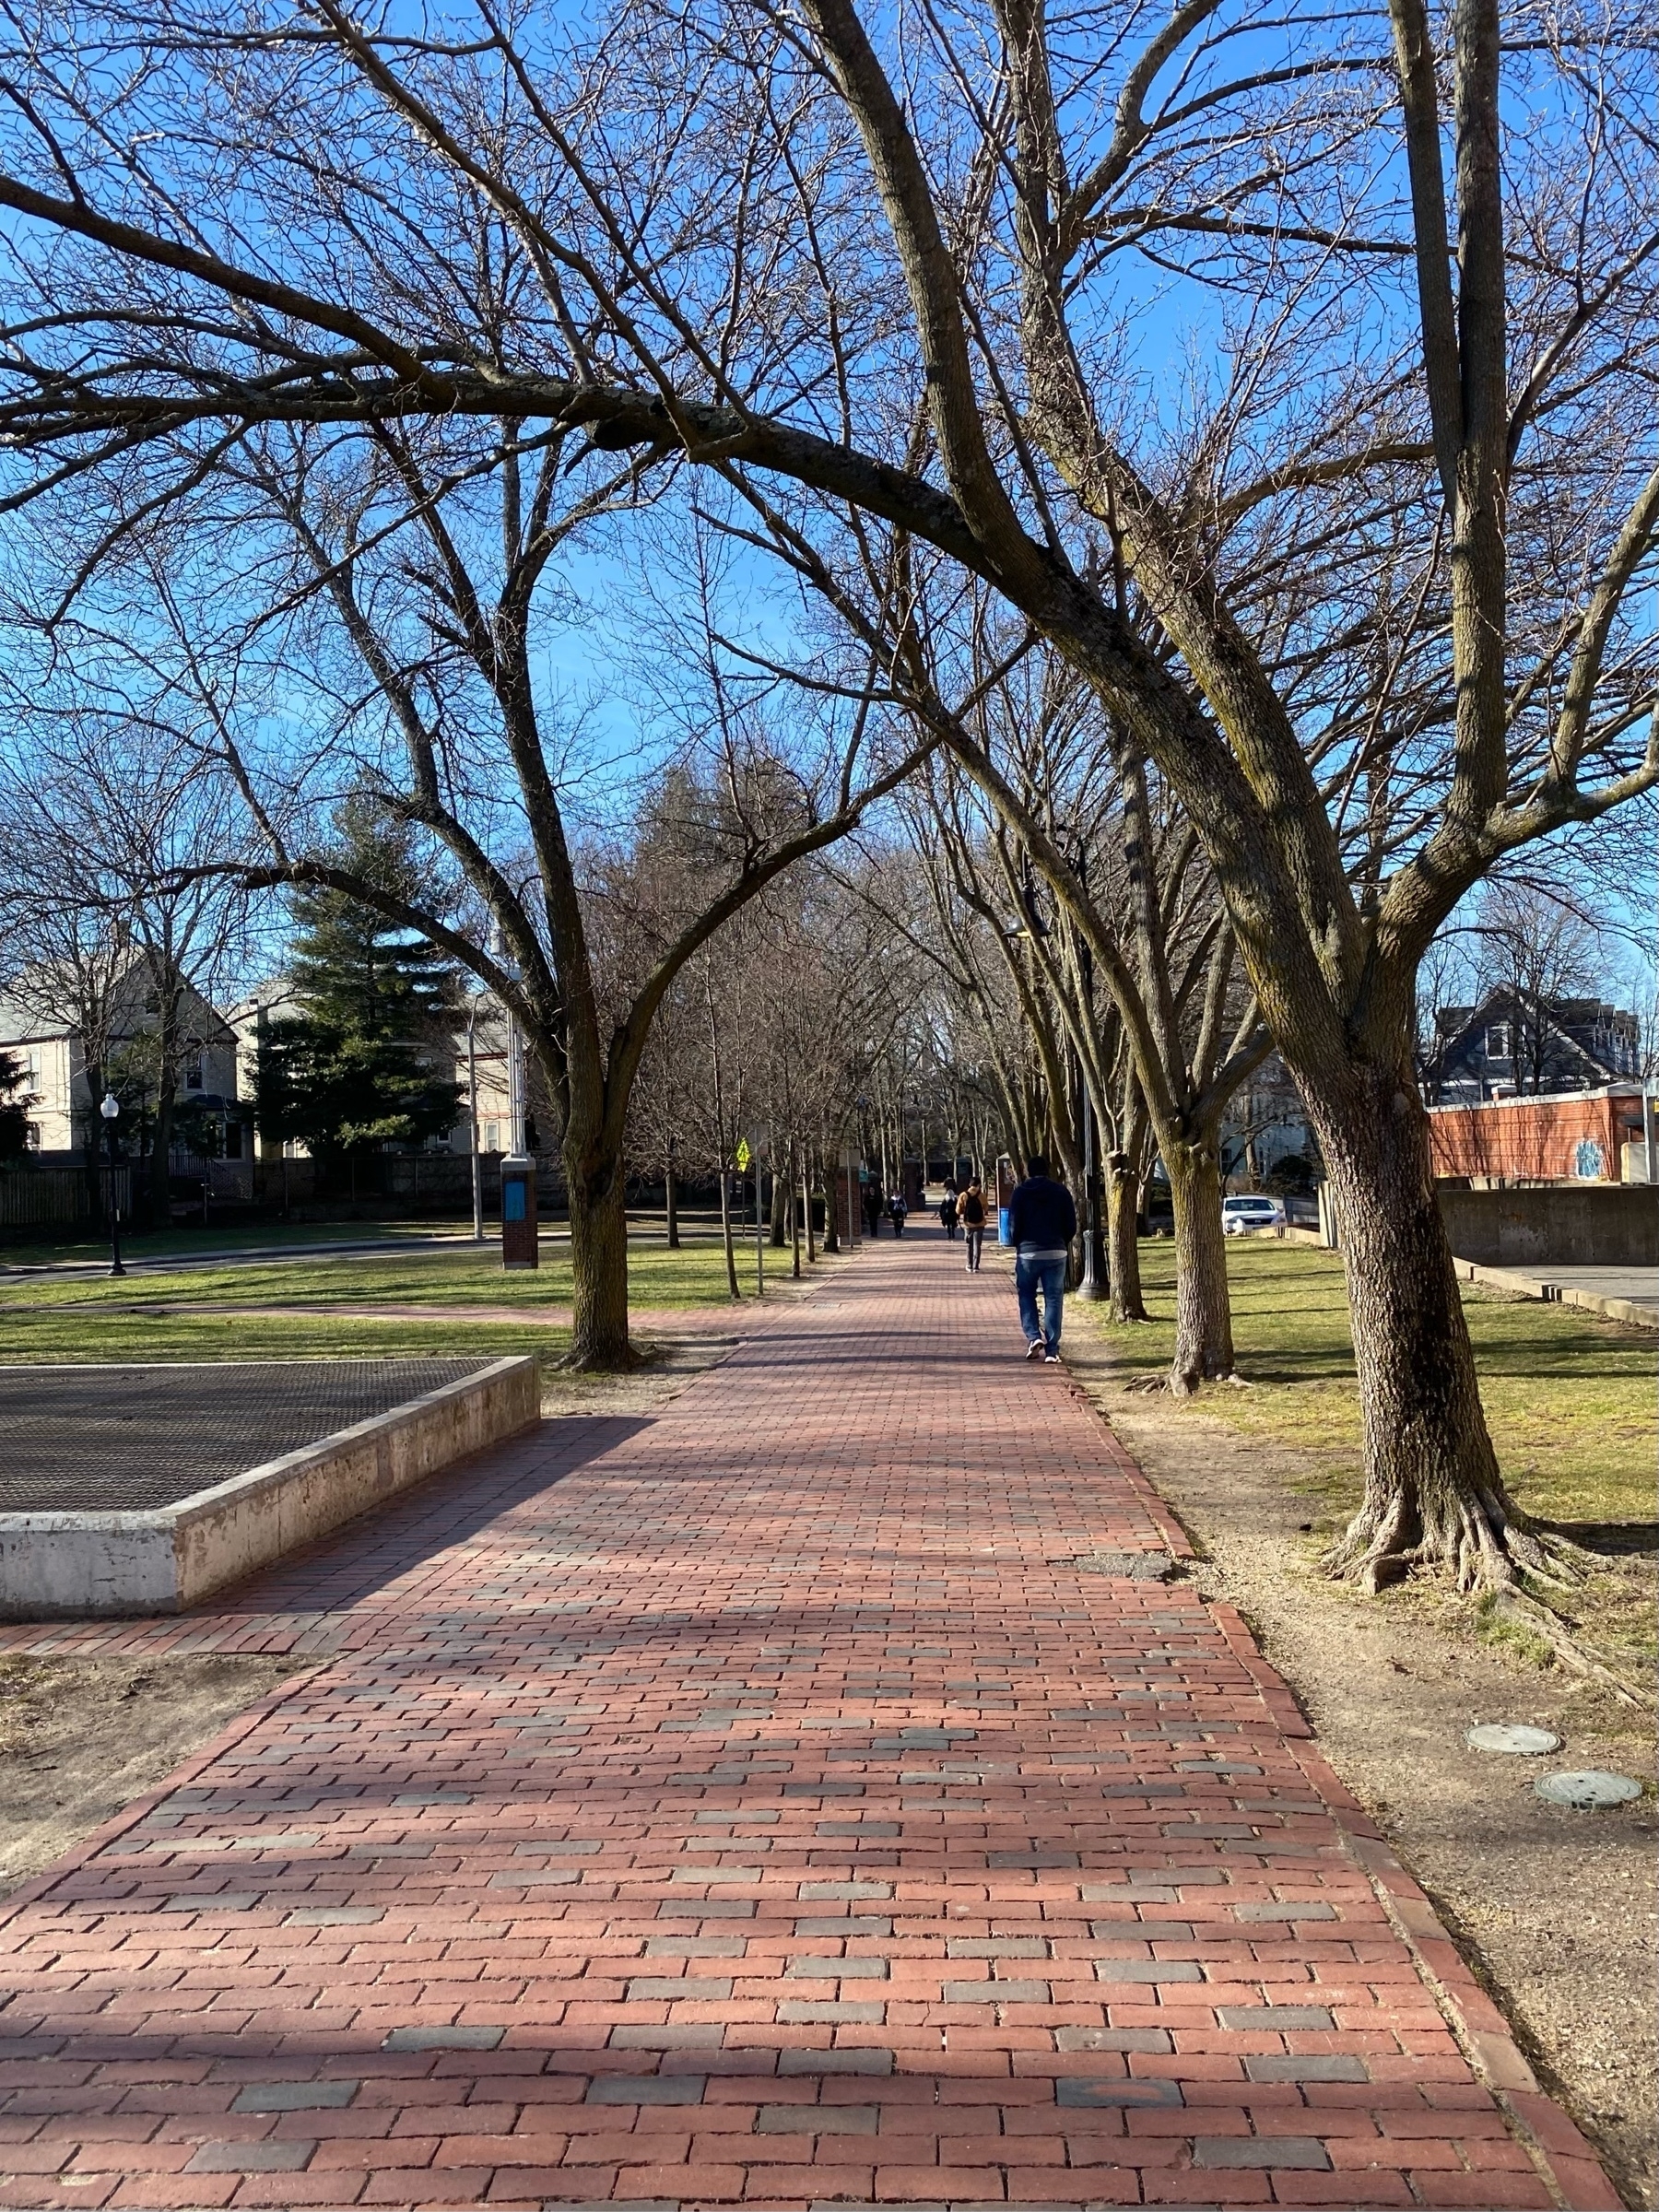 Sunlit brick path running straight ahead, with lawns on either side and the bare branches of trees against a blue sky above. 